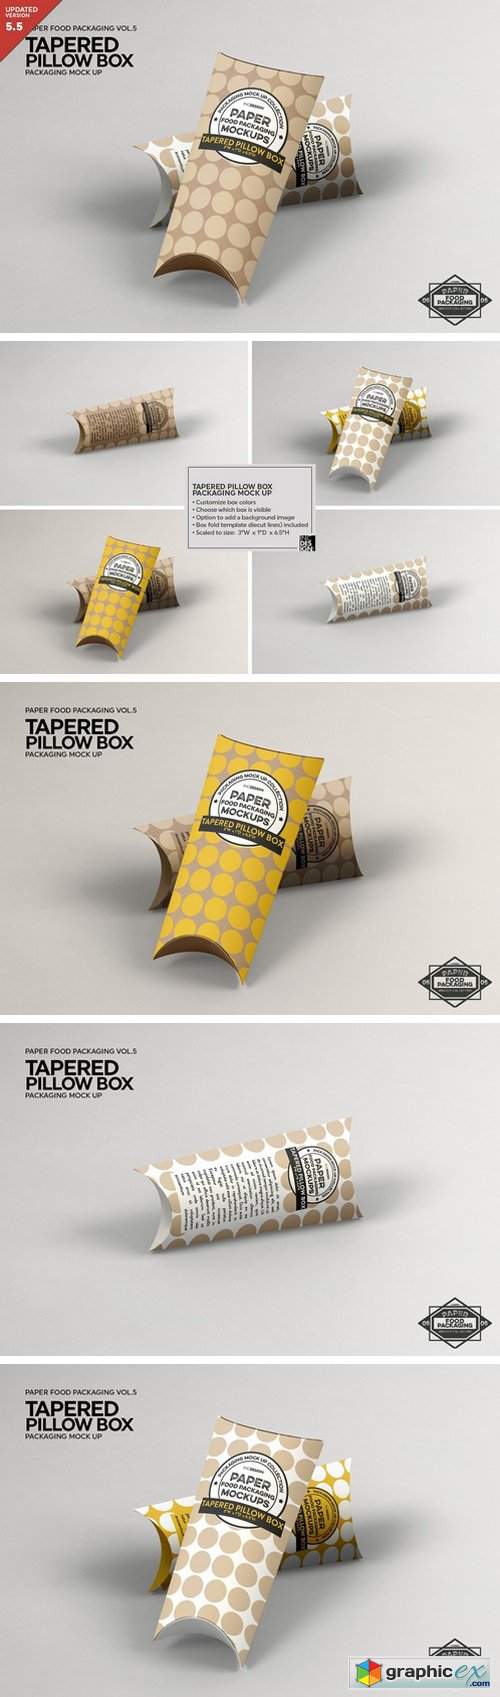 Tapered Pillow Box Packaging Mockup